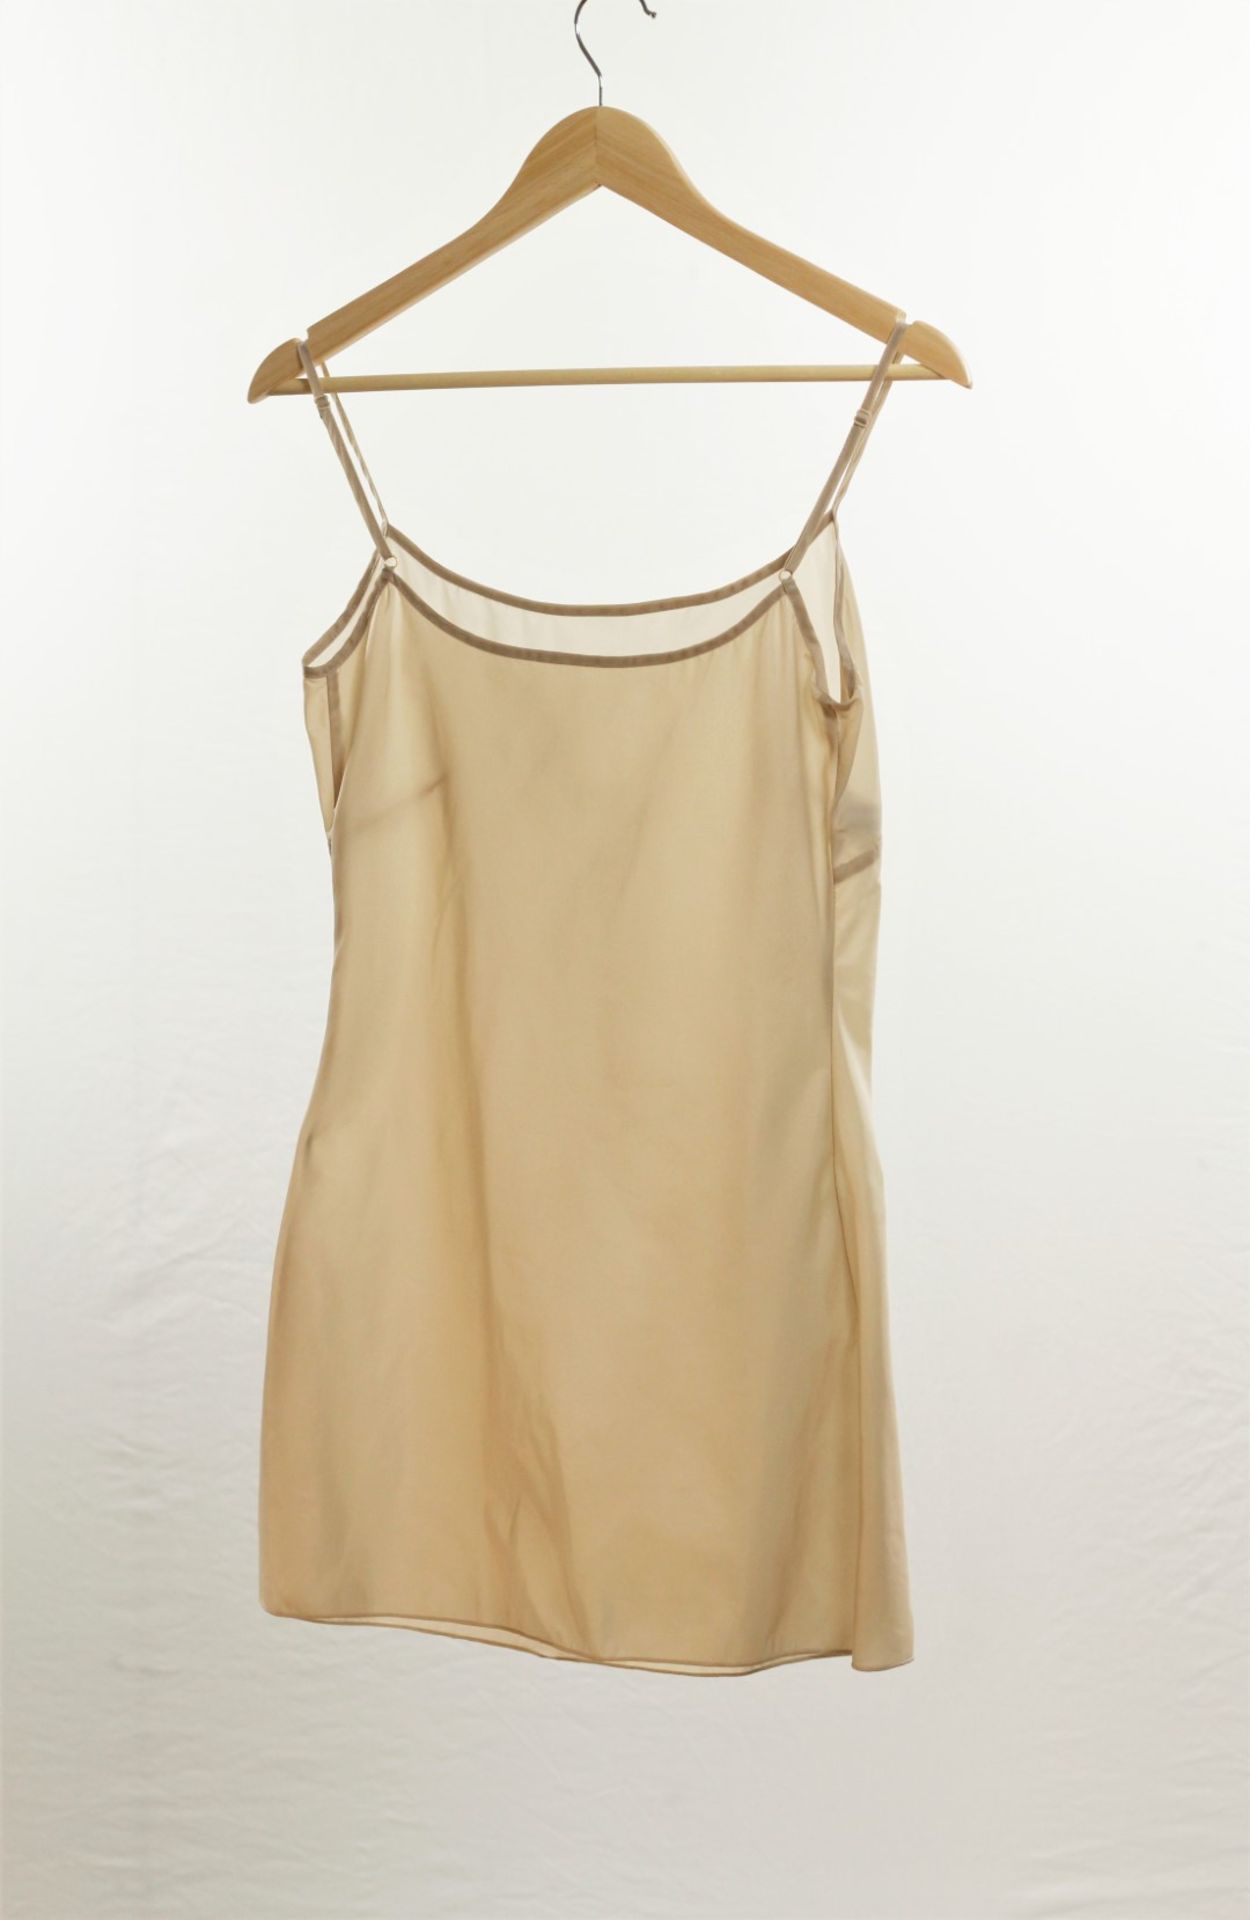 1 x Aeffe Spa Nude Slip - Size: 8 - Material: 100% Nylon - From a High End Clothing Boutique In